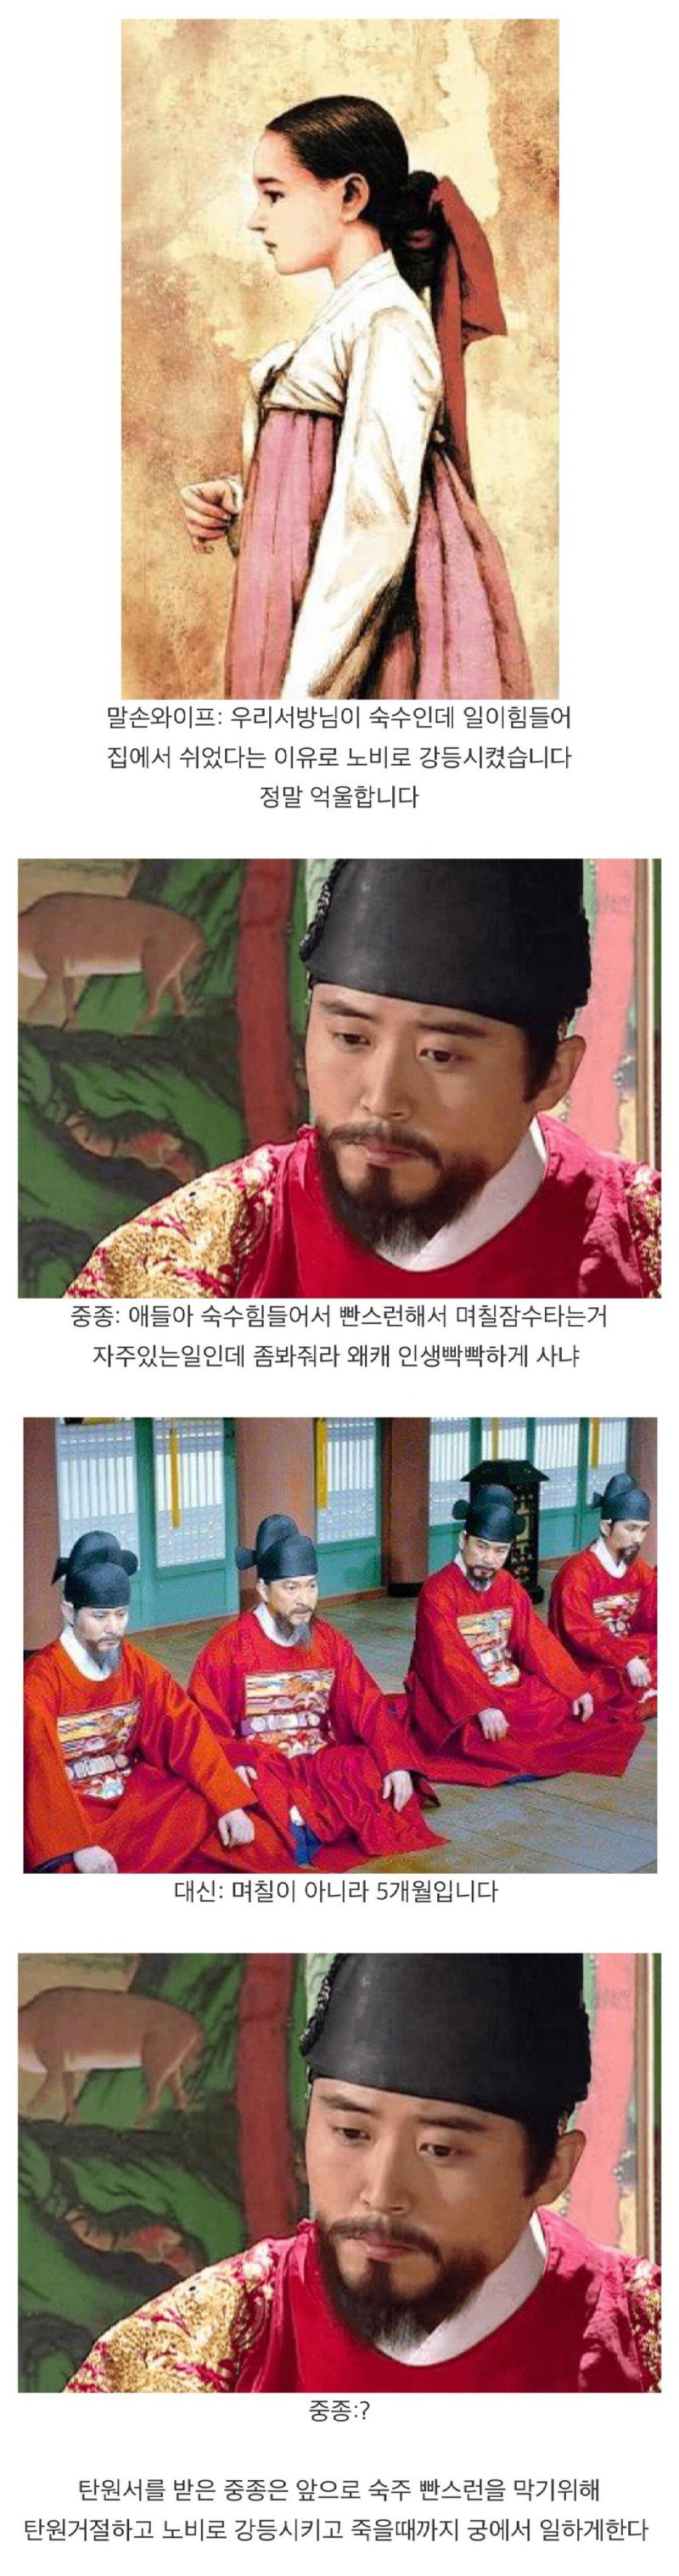 A story about the escape of a civil servant in the Joseon Dynasty